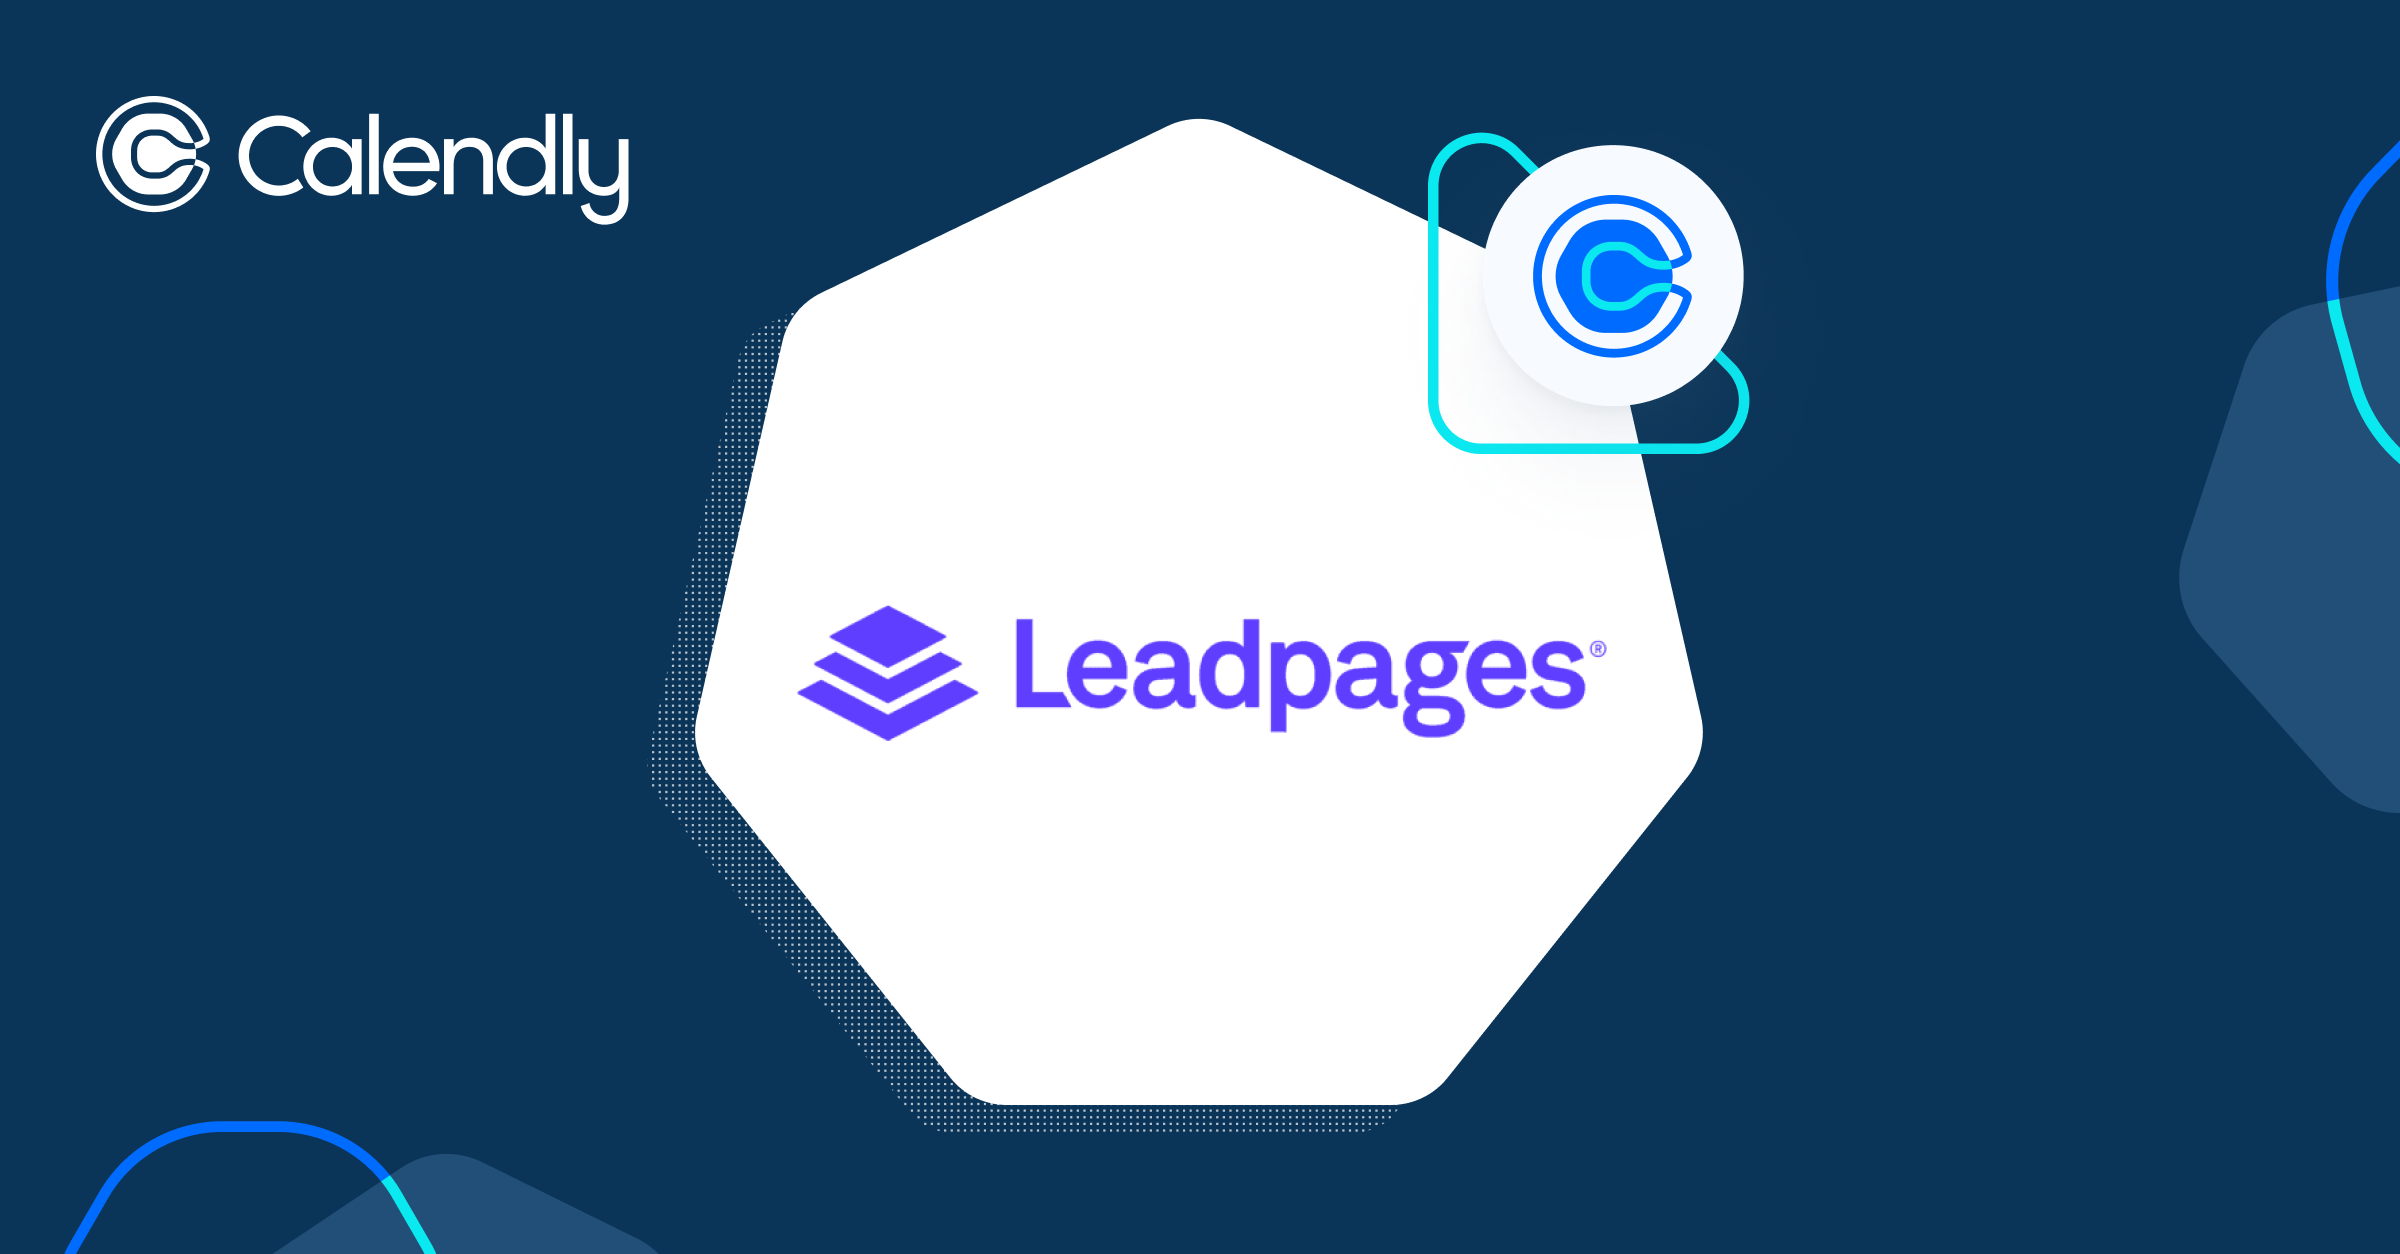 Leadpages integrates Calendly directly into landing pages to help